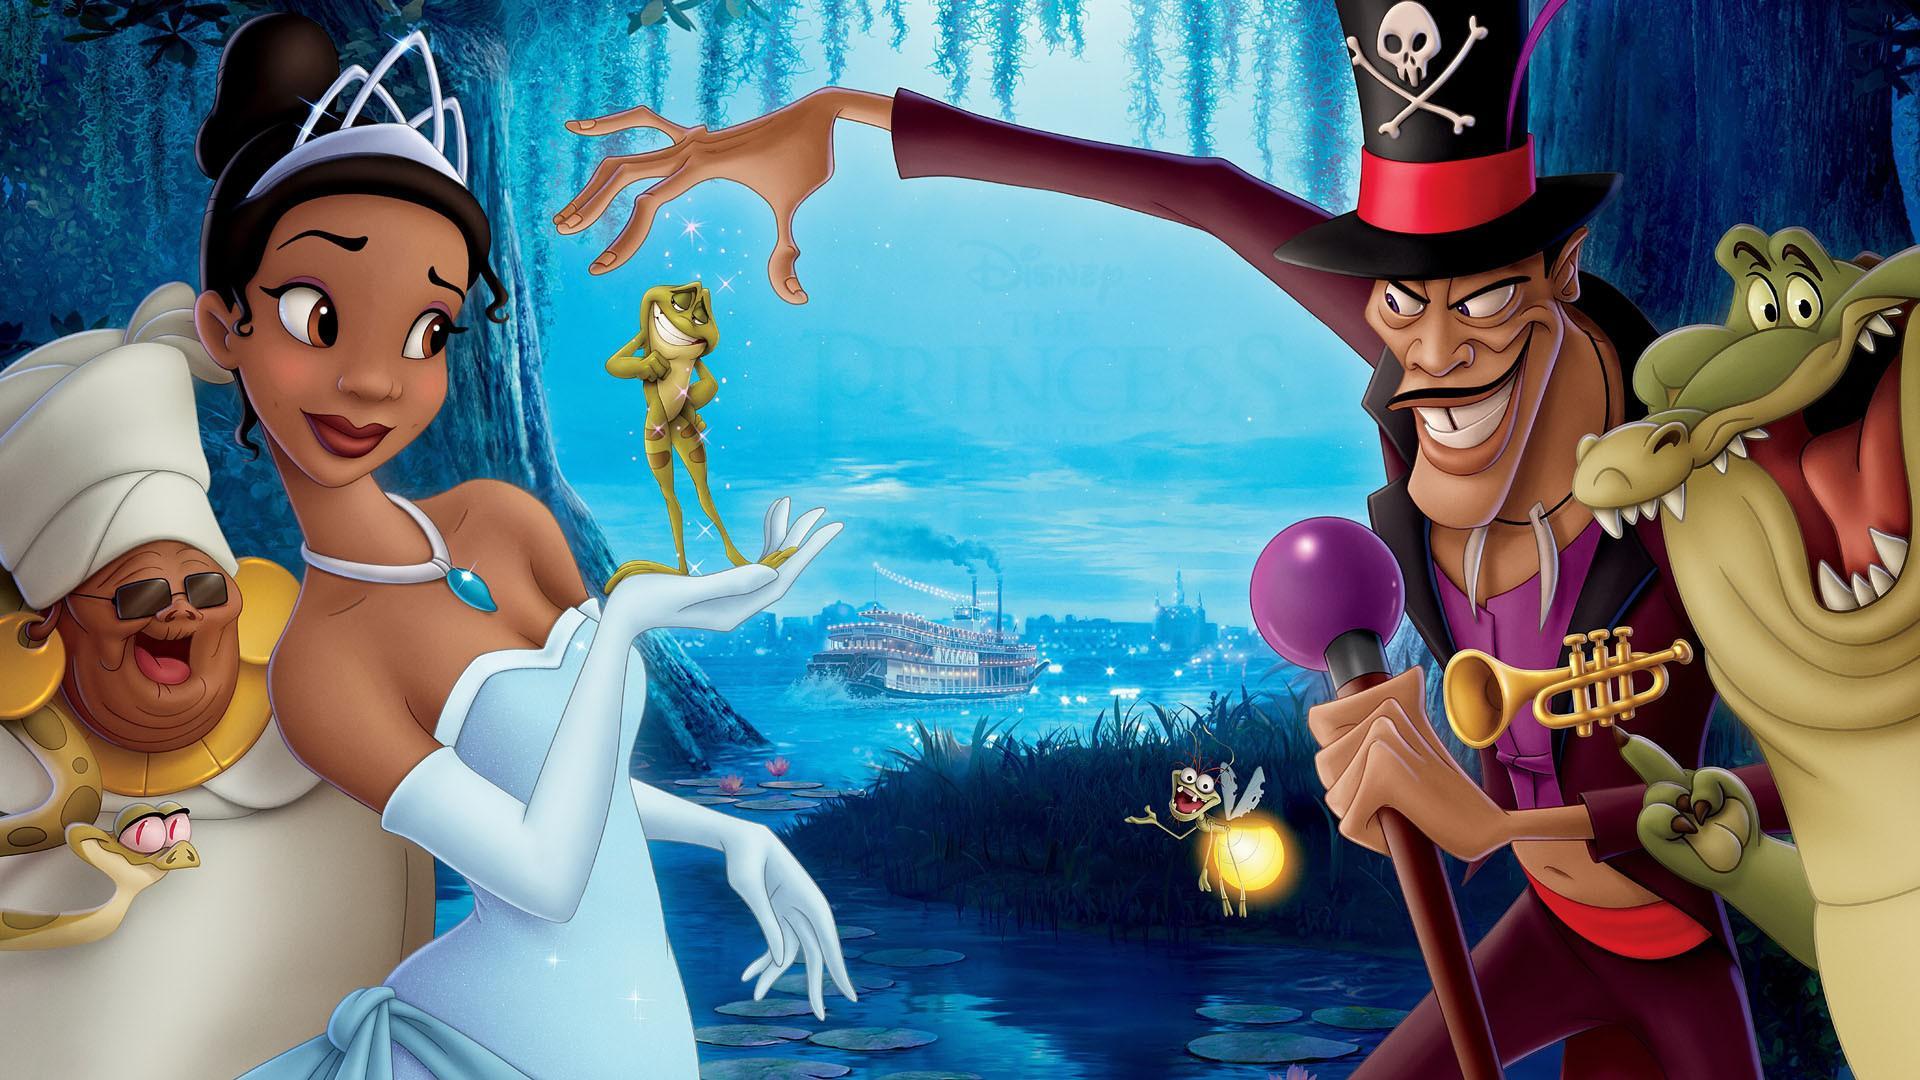 The Princess And The Frog Wallpaper Image